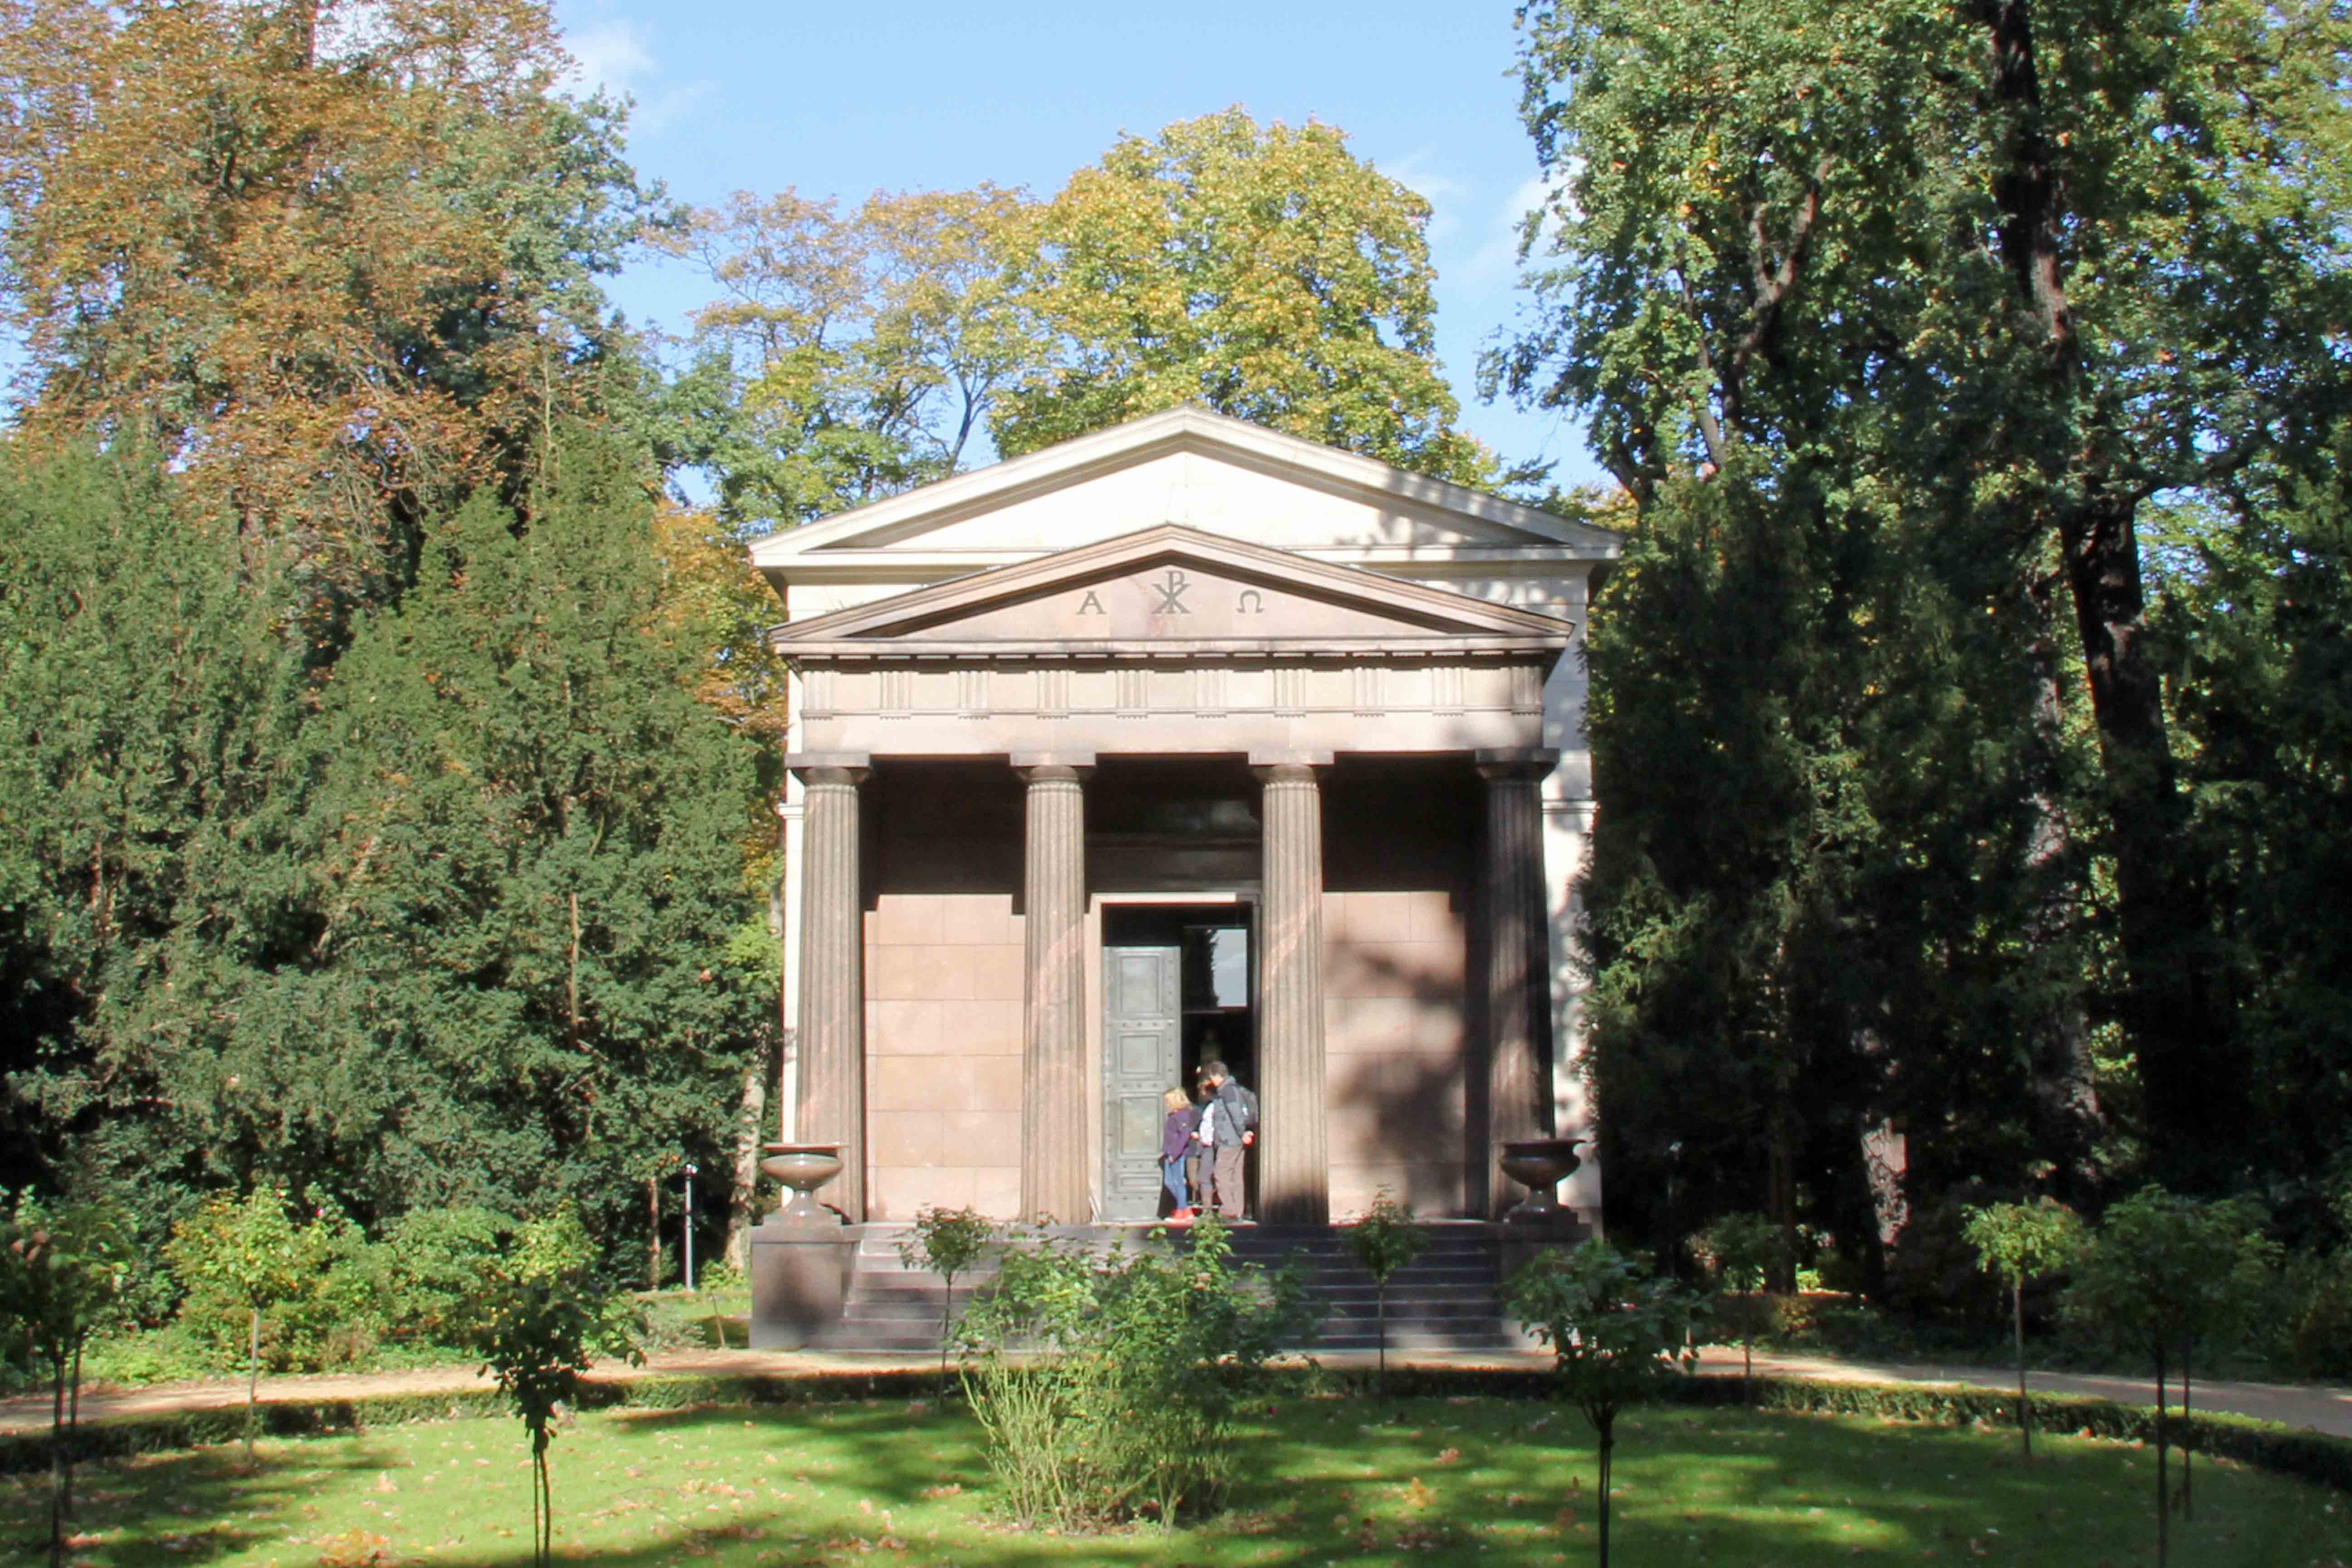 The Mausoleum in The Palace Gardens of Schloss Charlottenburg in Berlin